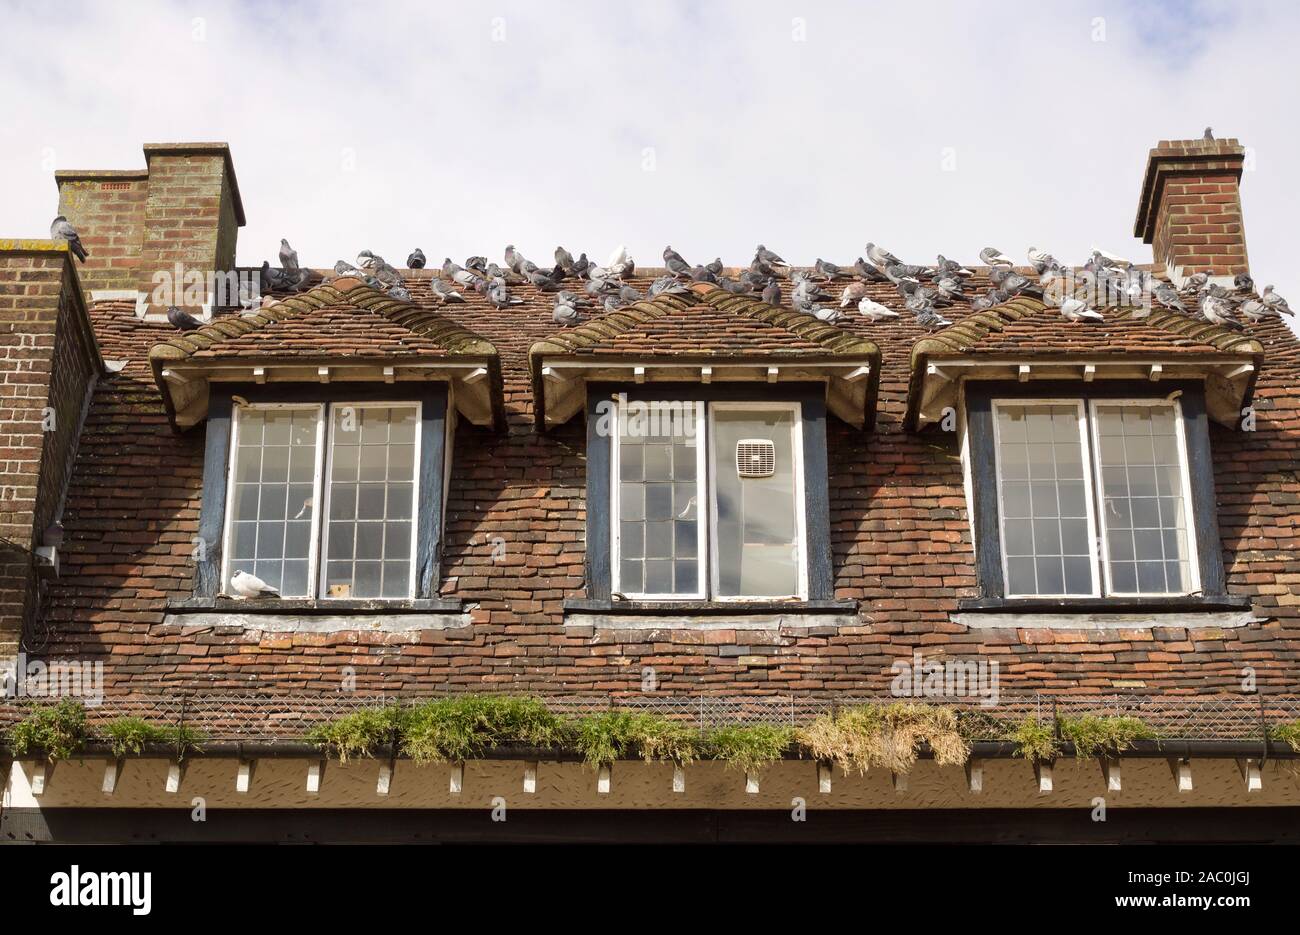 Infestation of pigeons on roof of old house Stock Photo